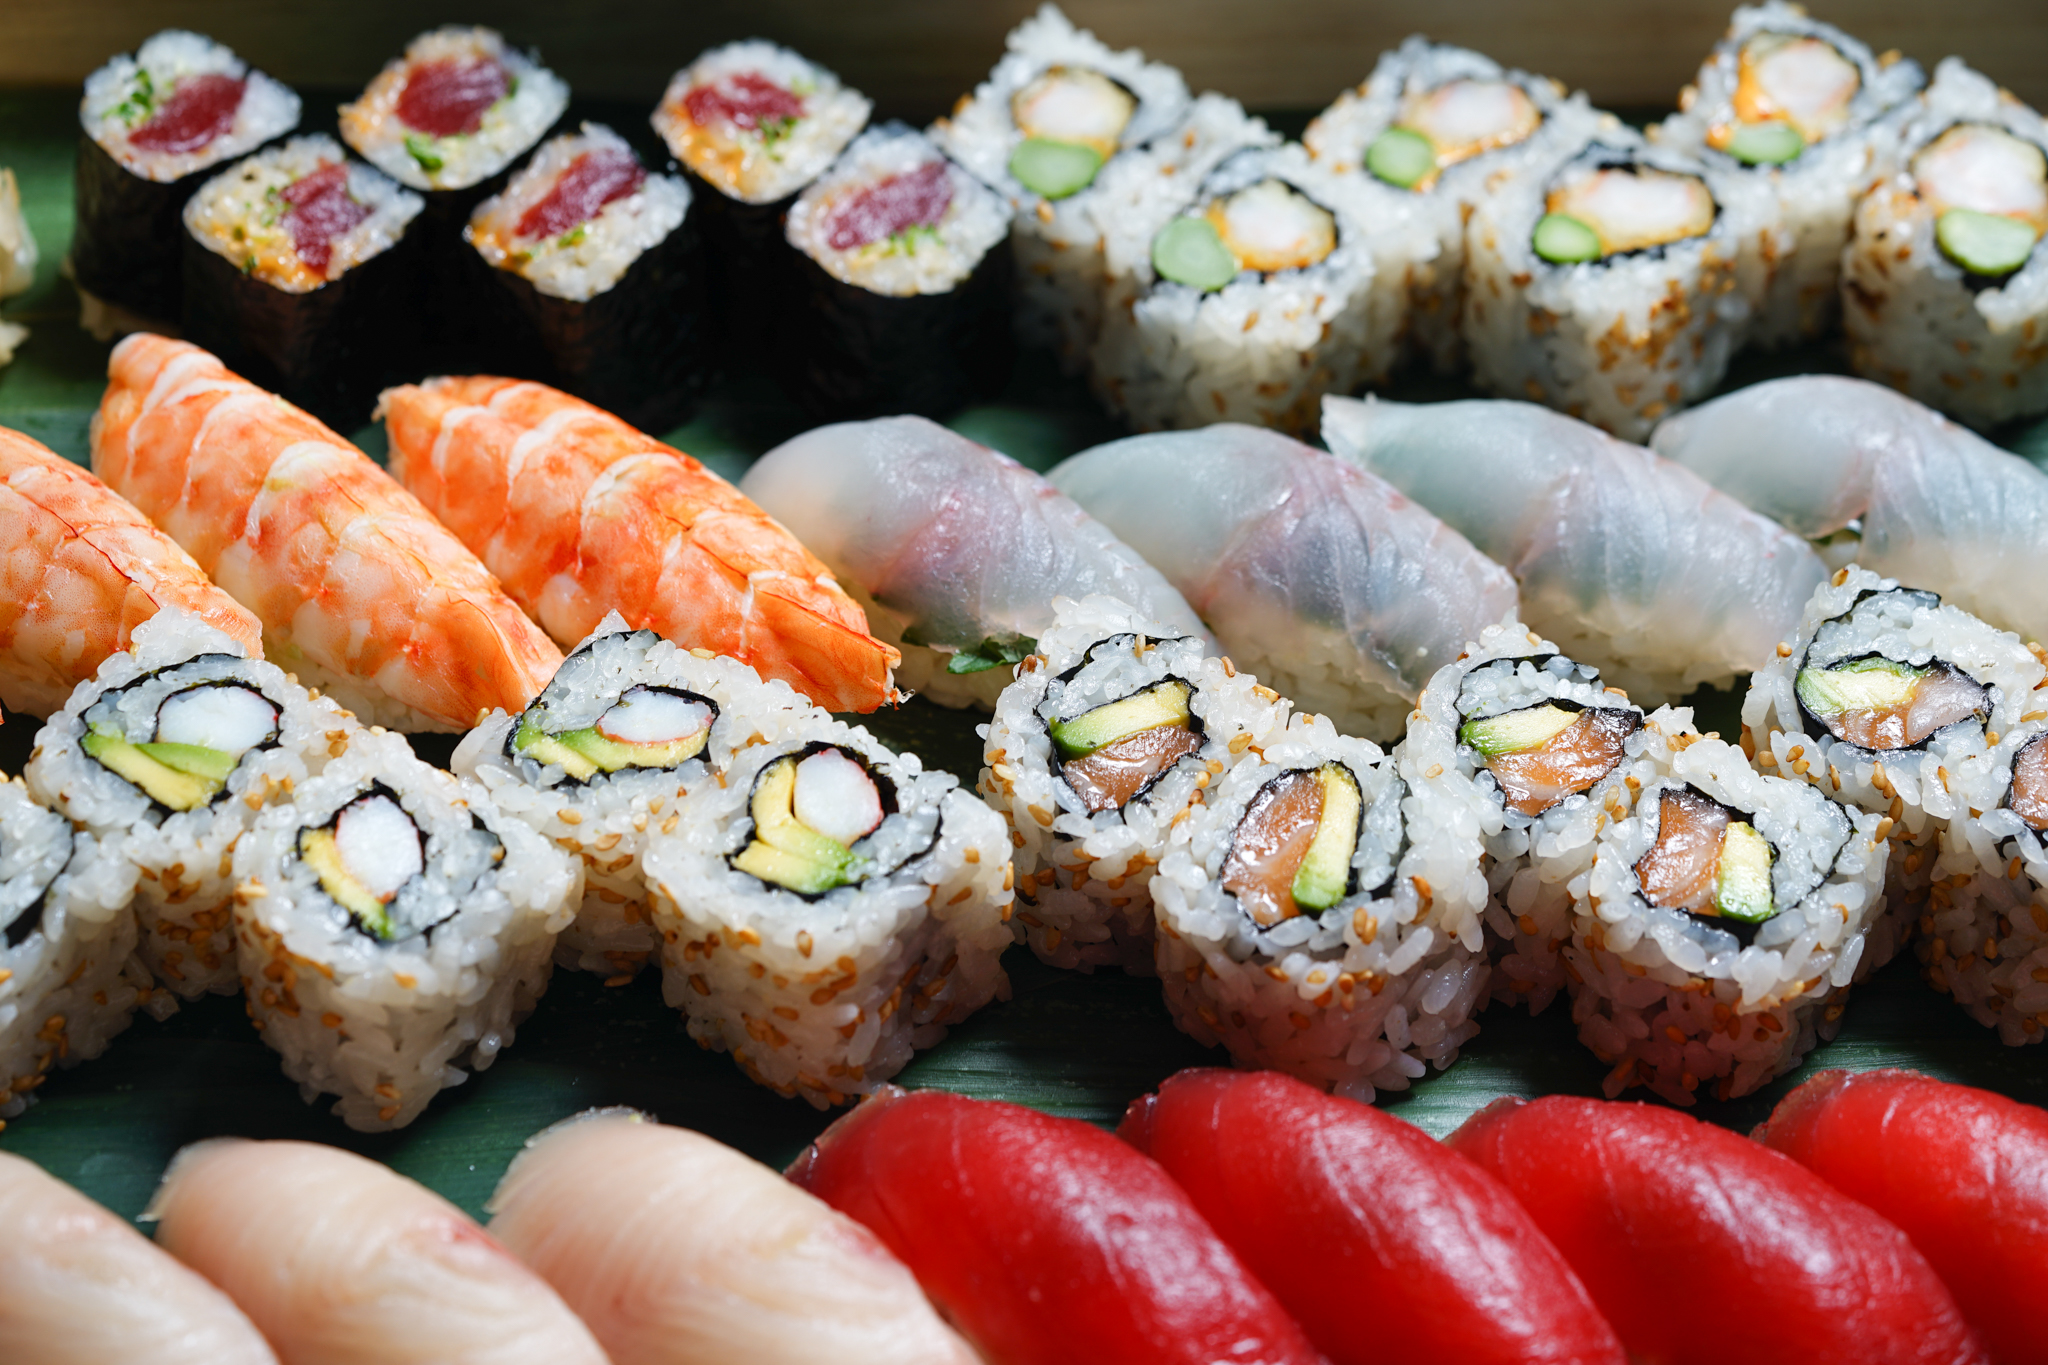       "Nobu at Home"   Take-out Online   Enjoy our extensive take-out menu for Take-out!       &nbsp; Order Online     &nbsp;  